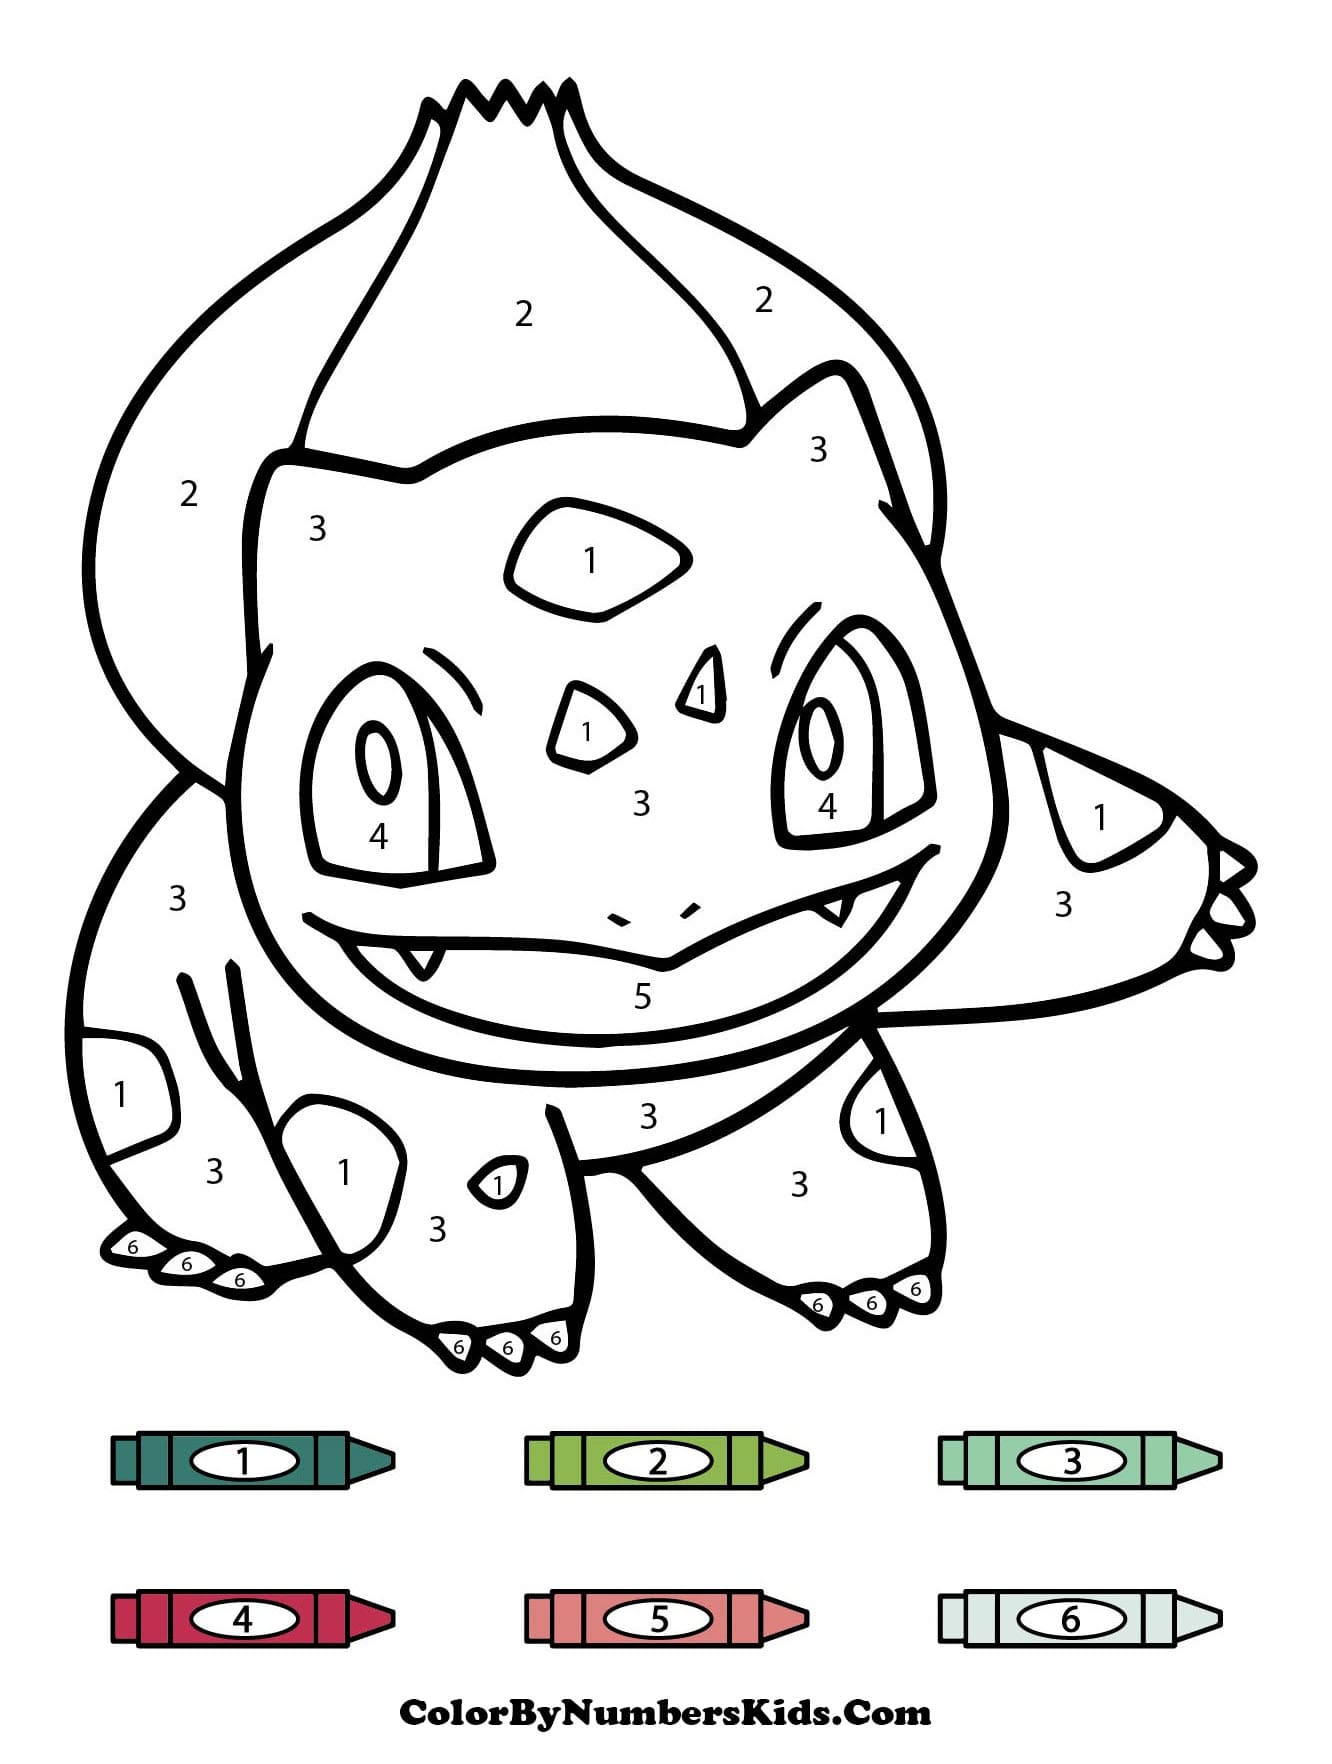 Pokemon Bulbasaur Color By Numbers